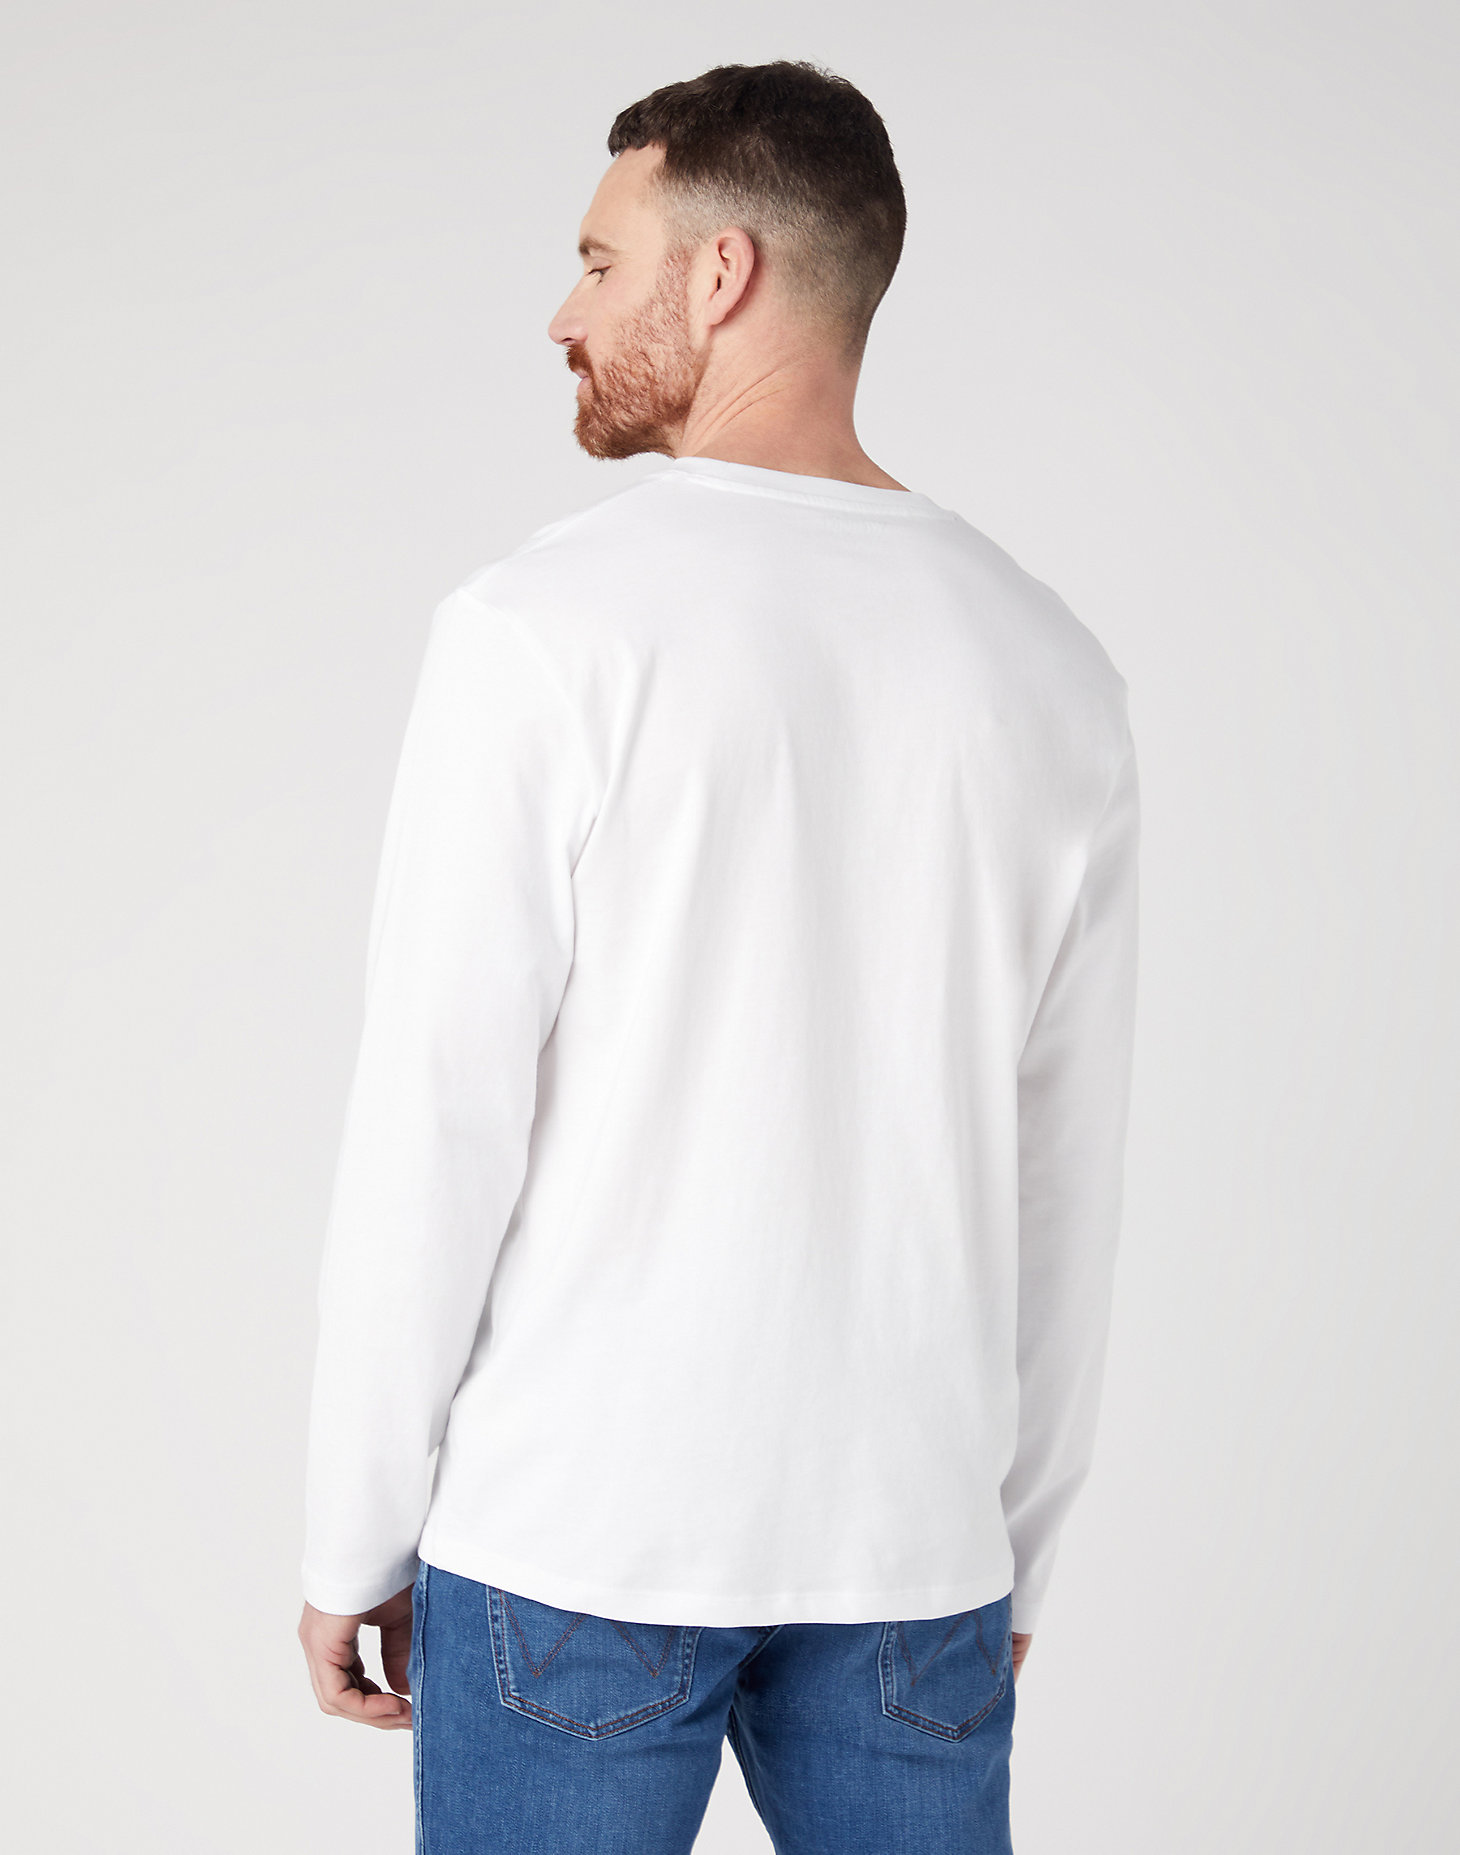 Long Sleeve Sign Off Tee in White alternative view 2